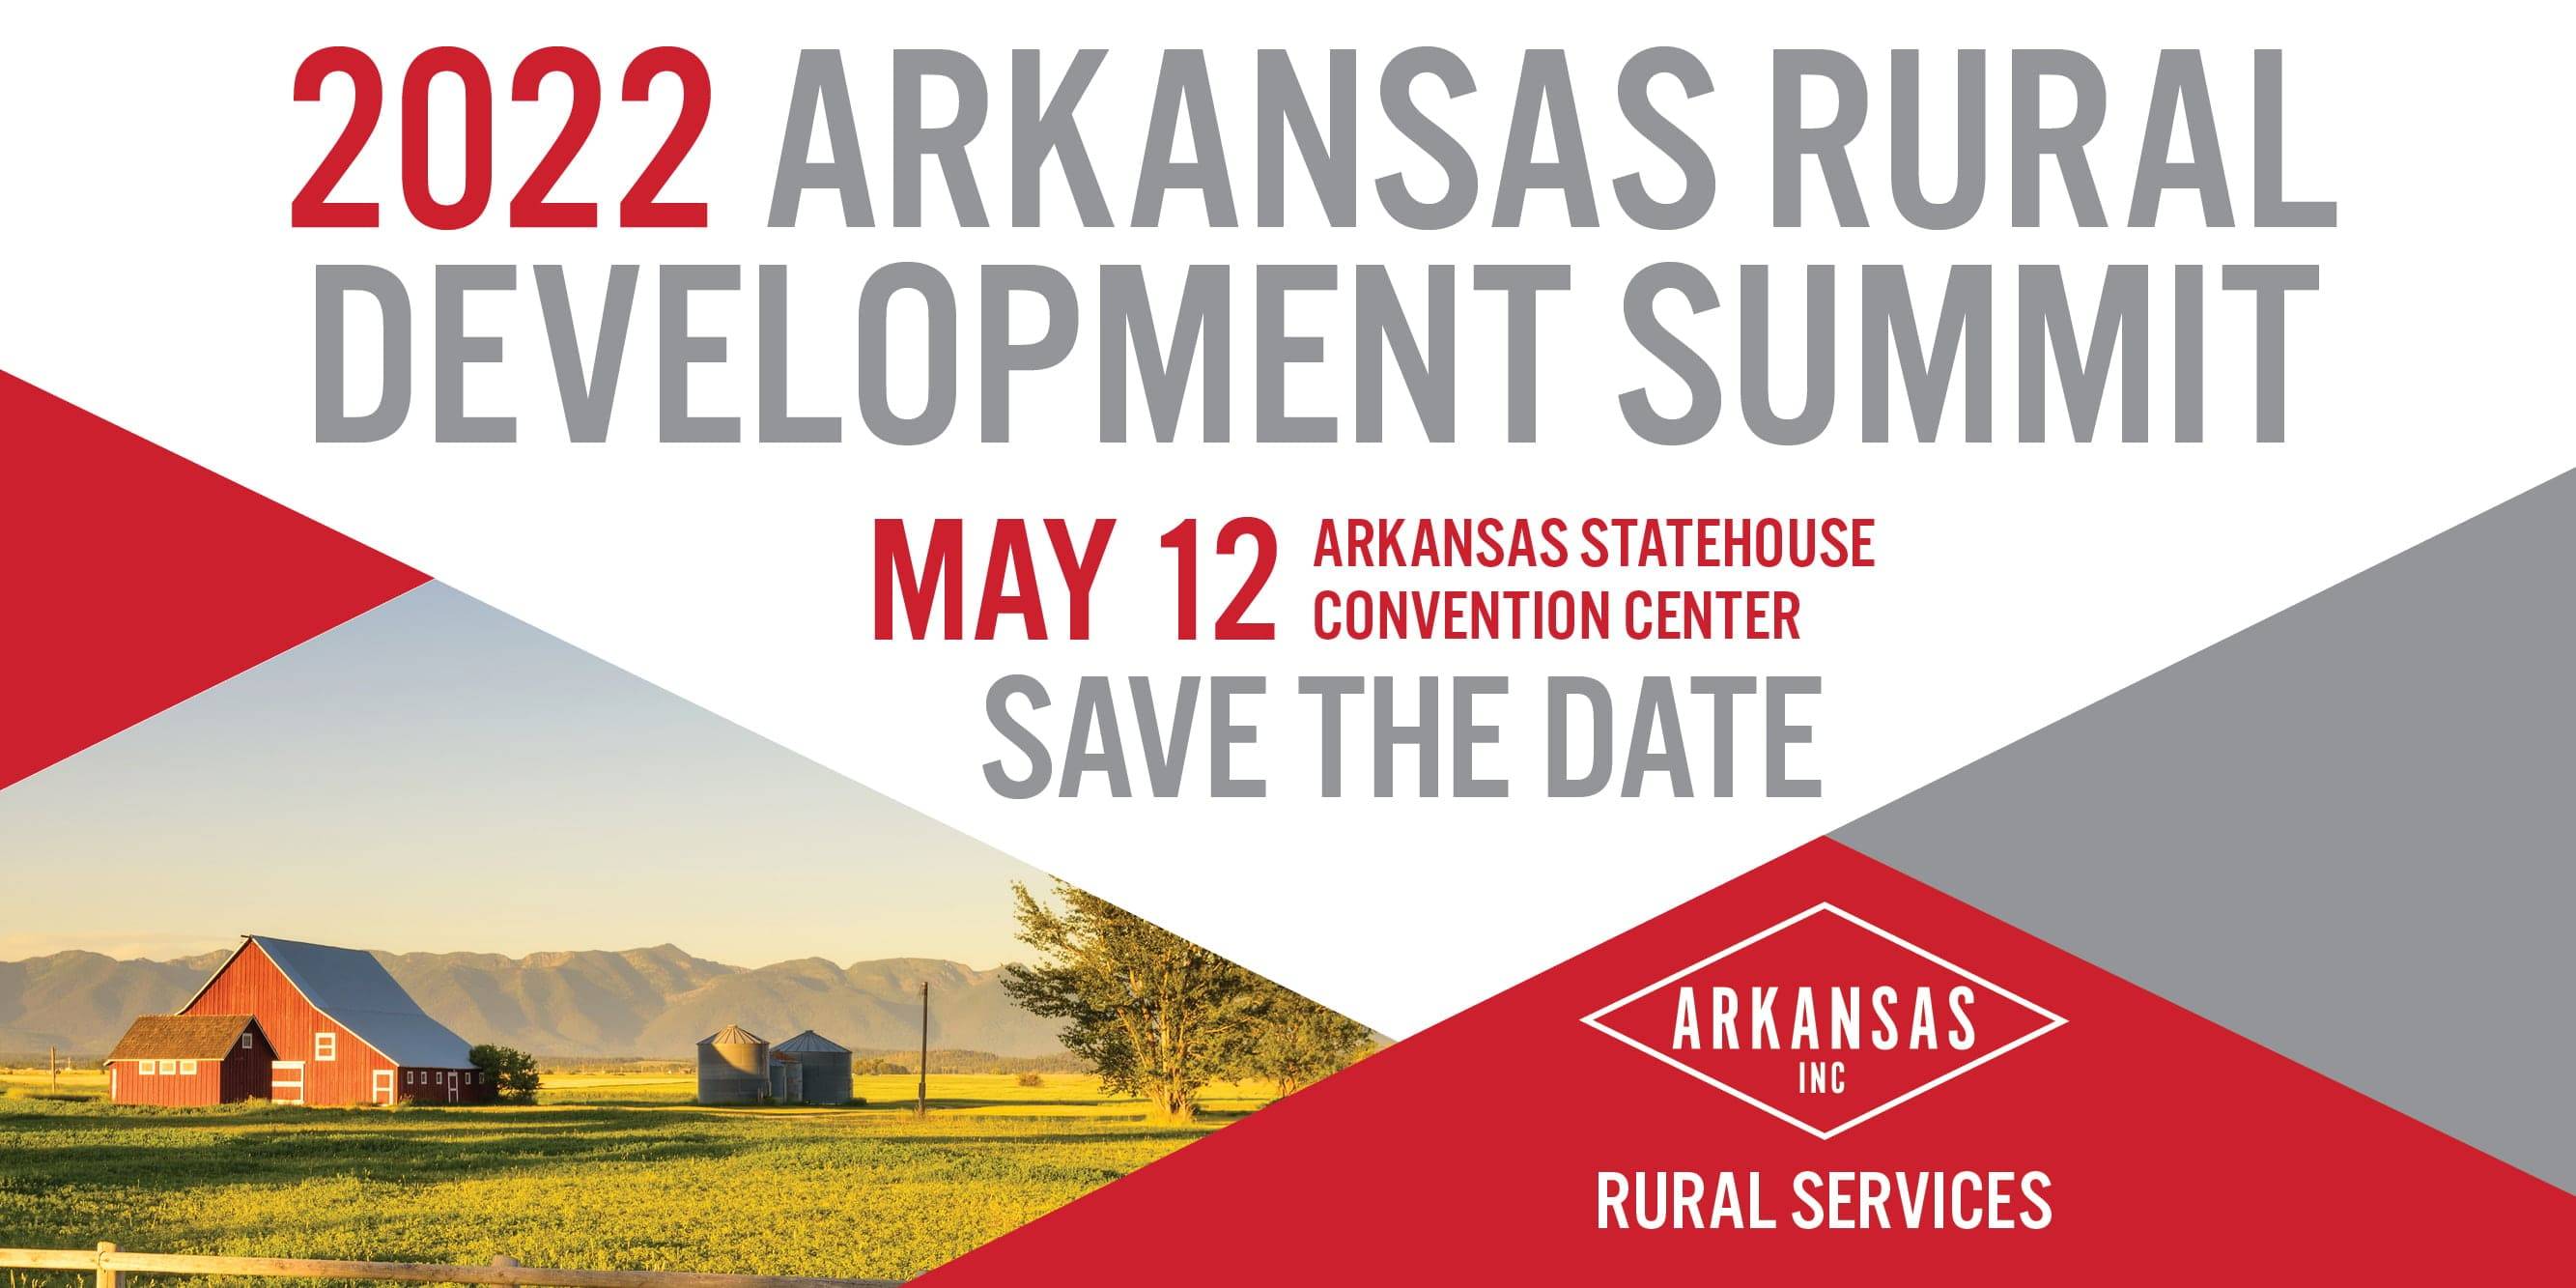 SAVE the DATE rural